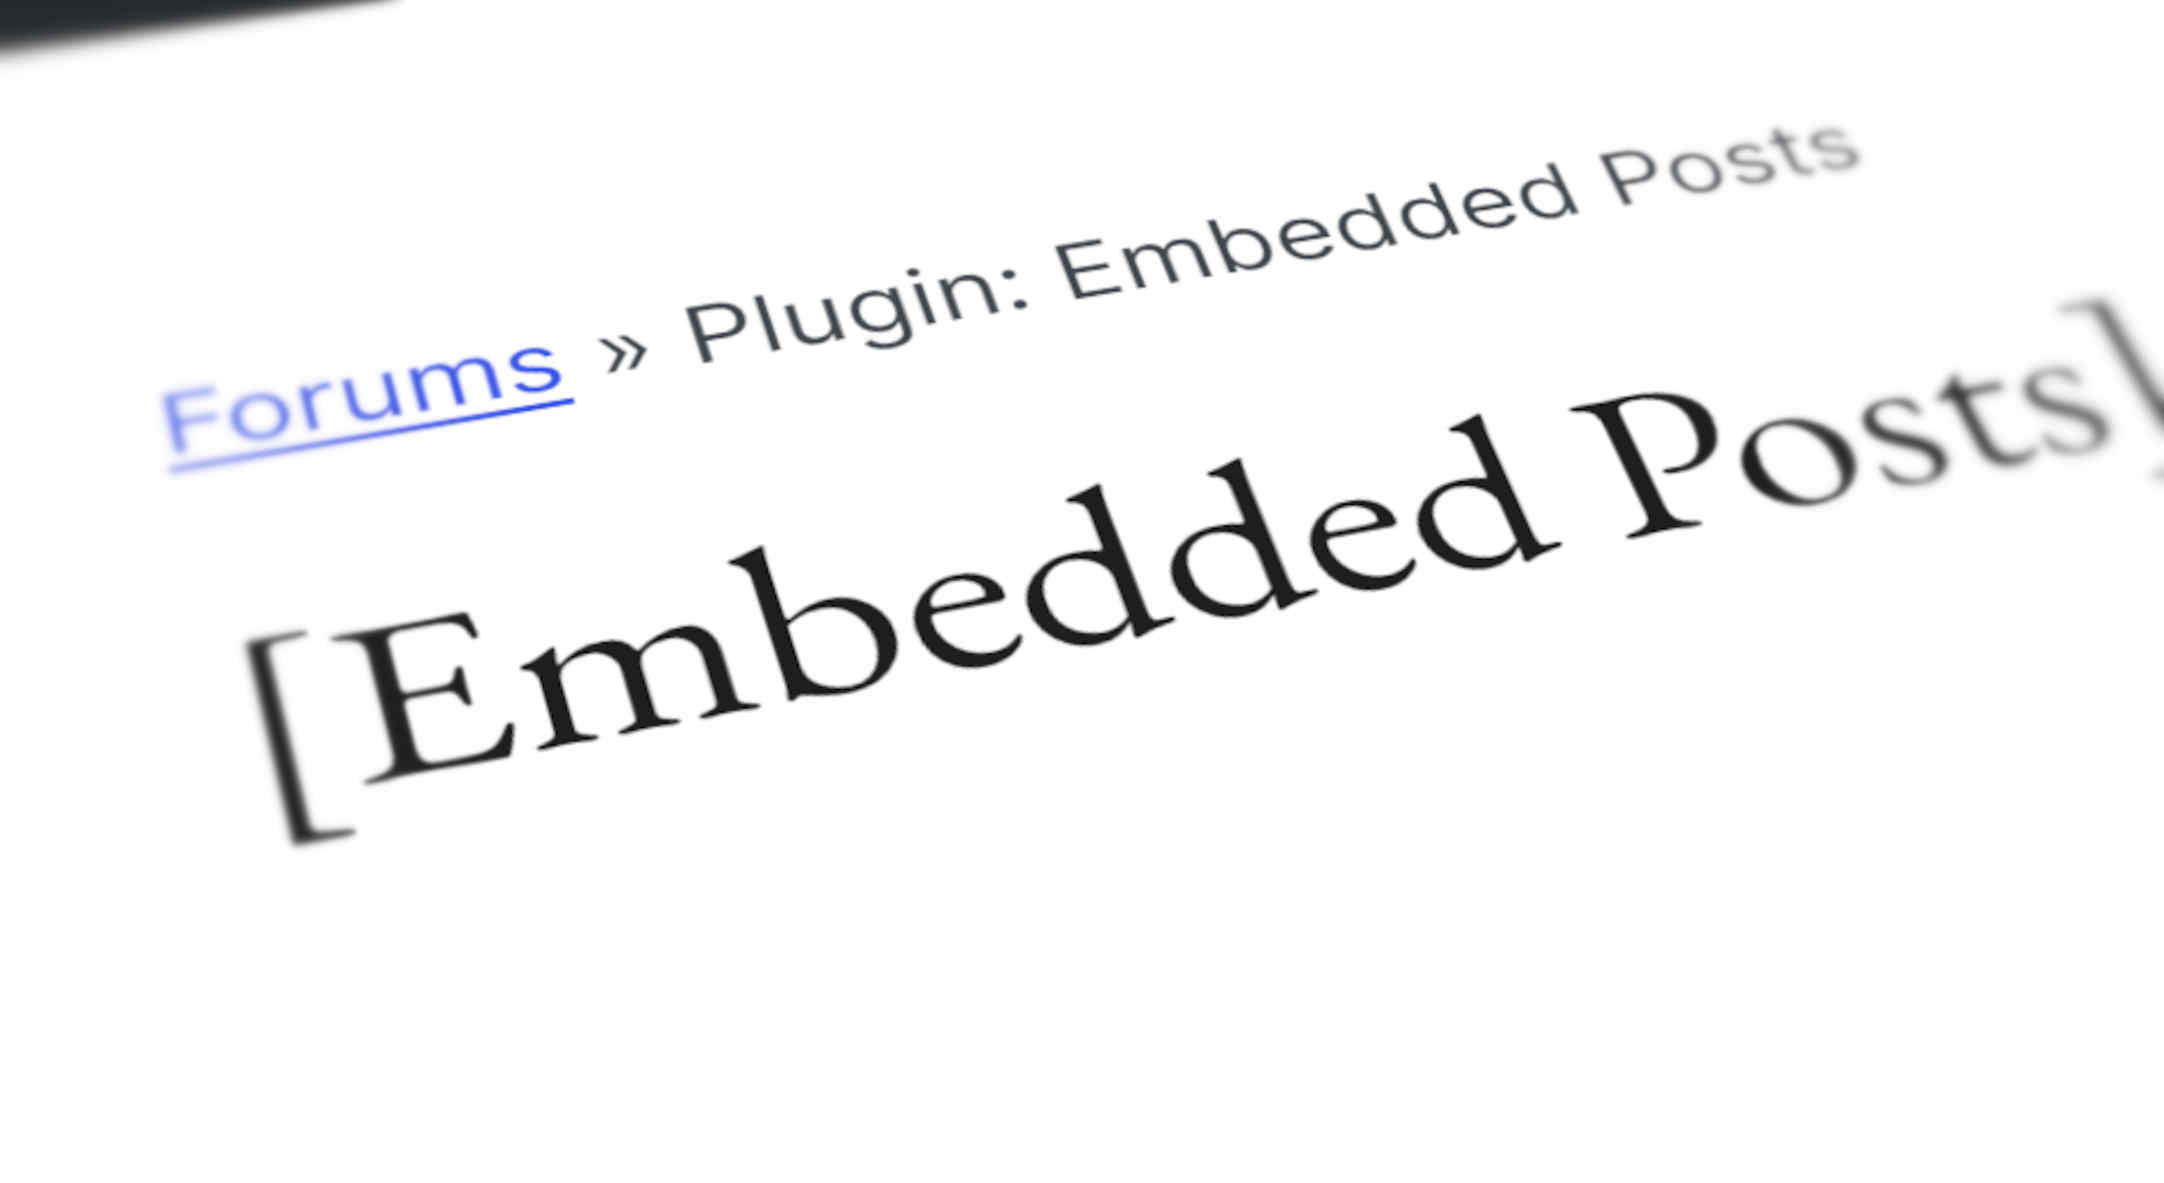 Stylised screenshot of WordPress Support page for Embedded Posts